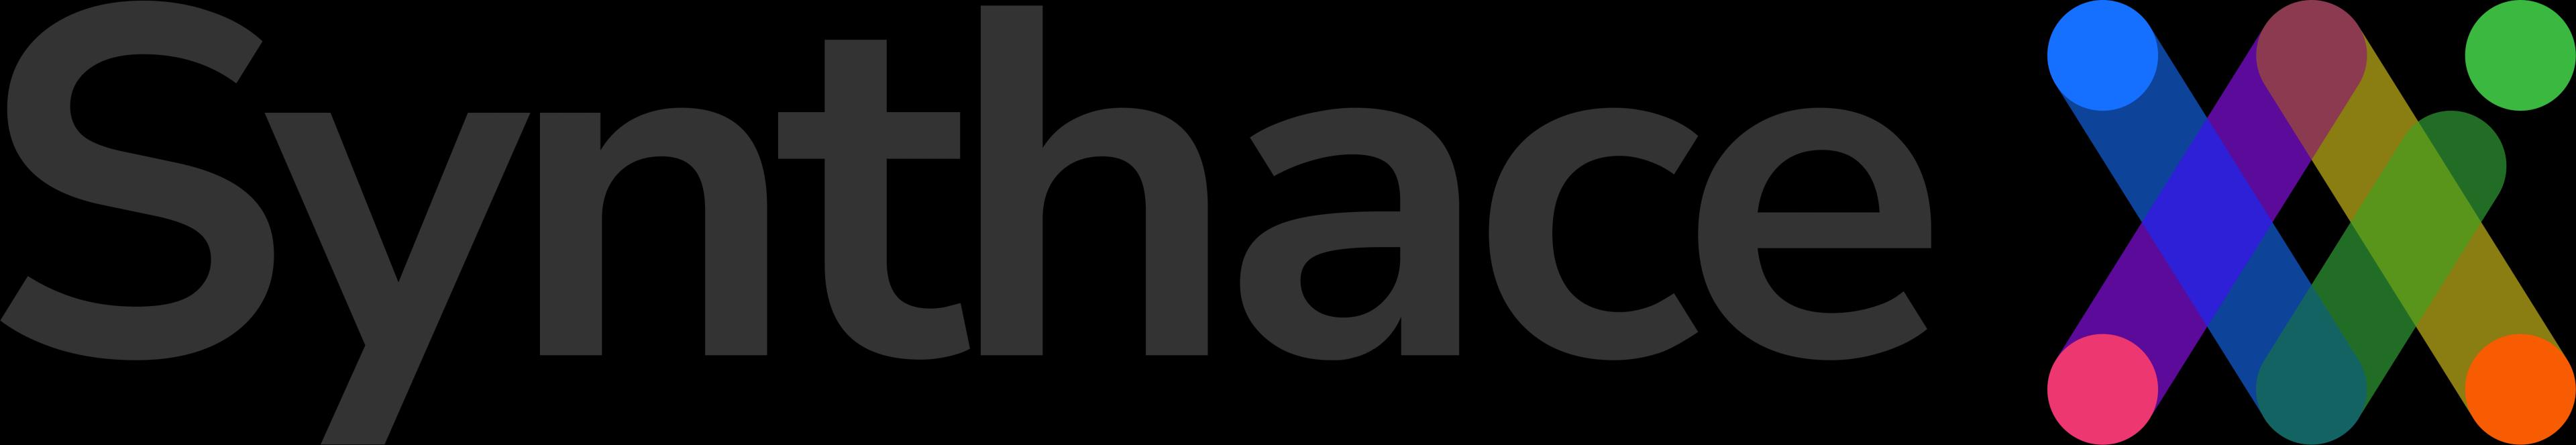 Synthace_logo